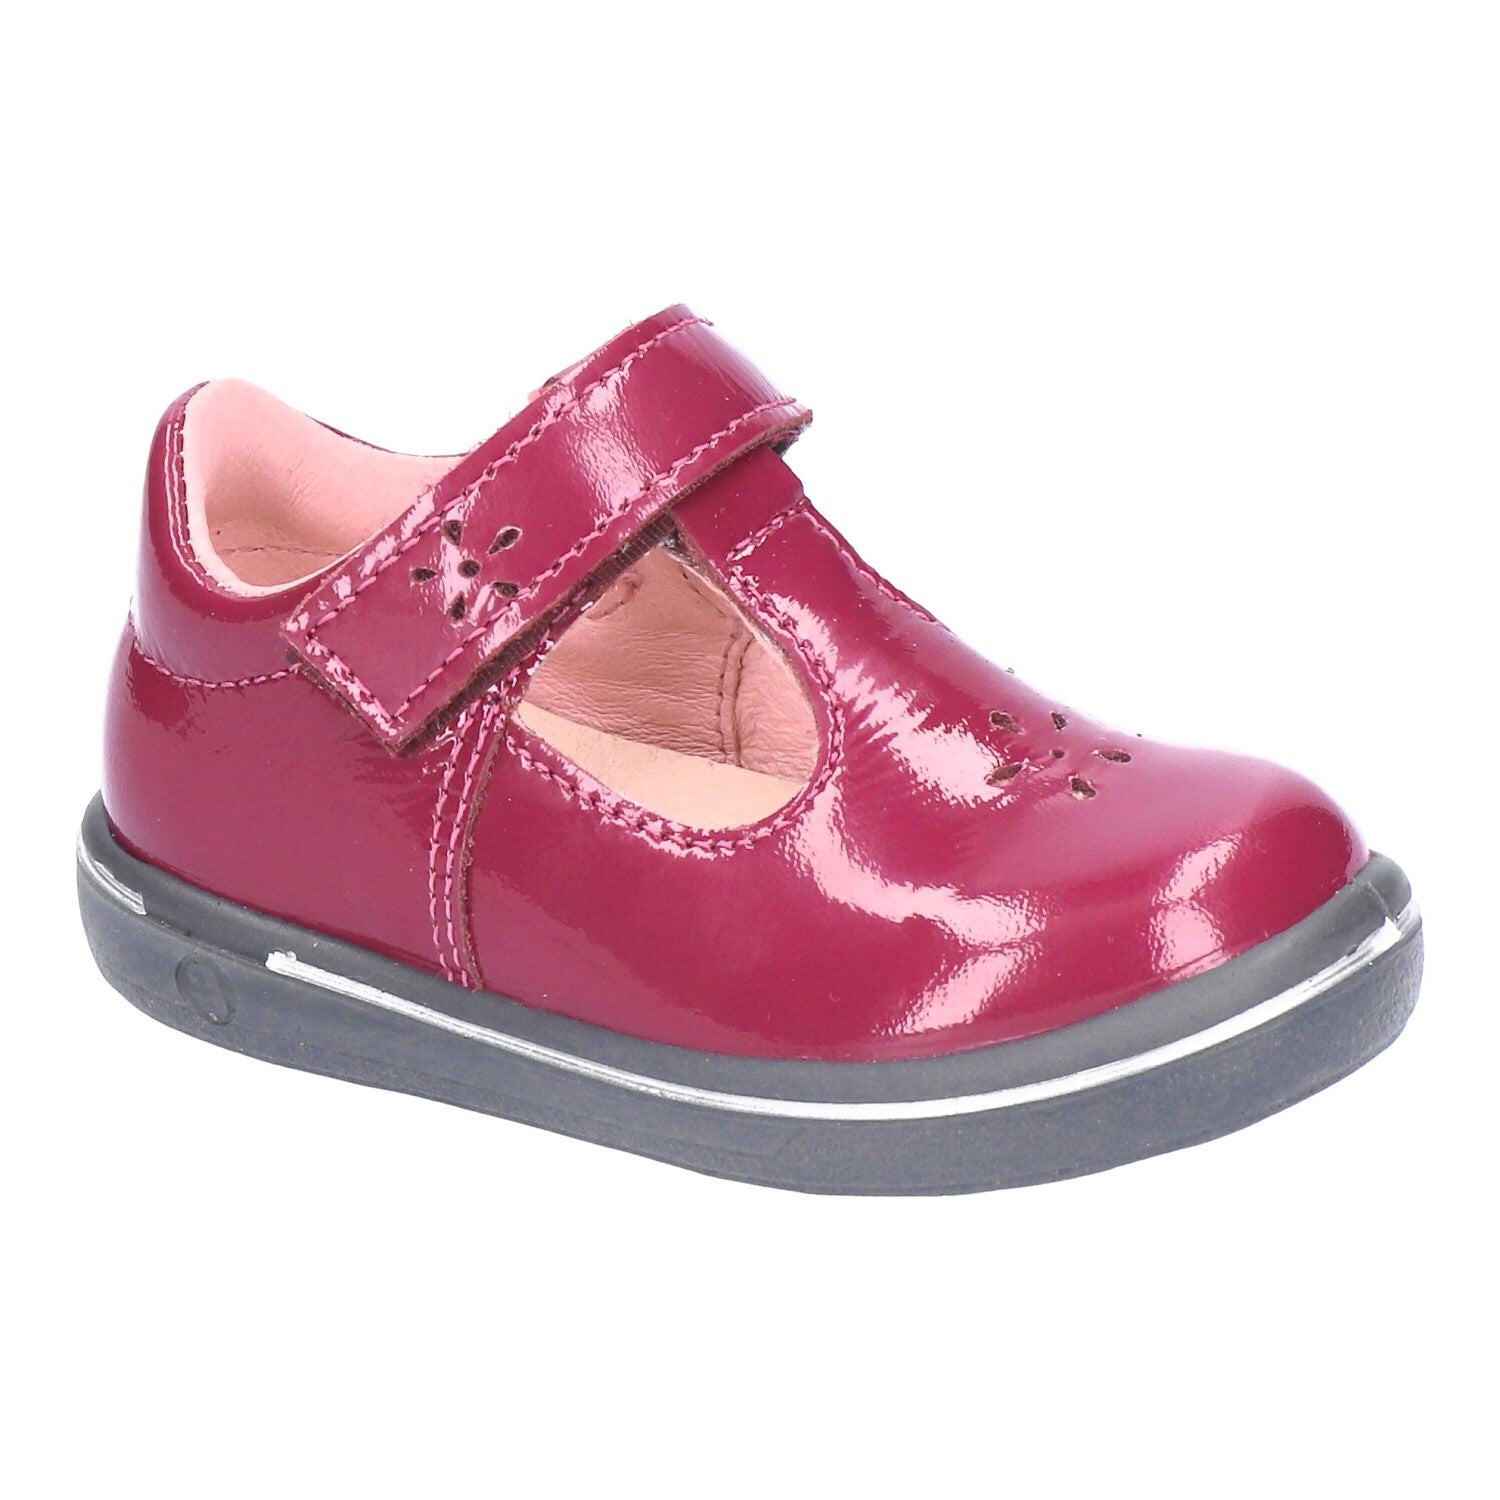 A girls T-Bar shoe by Ricosta, style Winona, in purple patent with velcro fatening. Right side view.